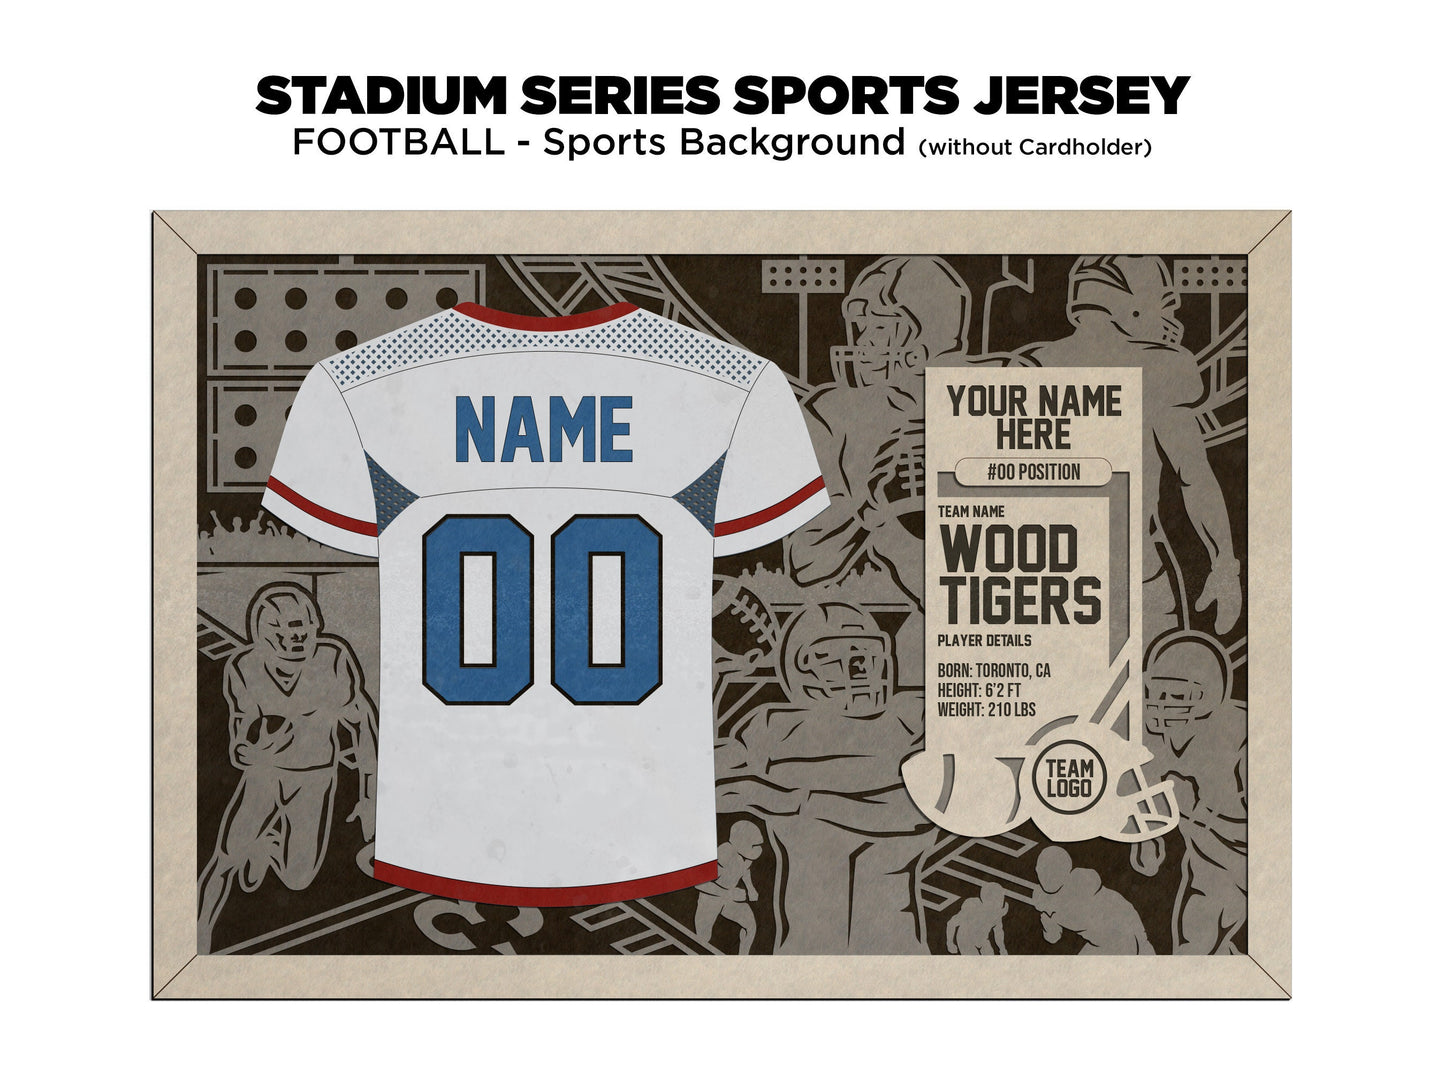 Stadium Series Jerseys - Football - 3 Variations - Male, Female & Alternate Backgrounds - SVG File Download - Sized for Glowforge